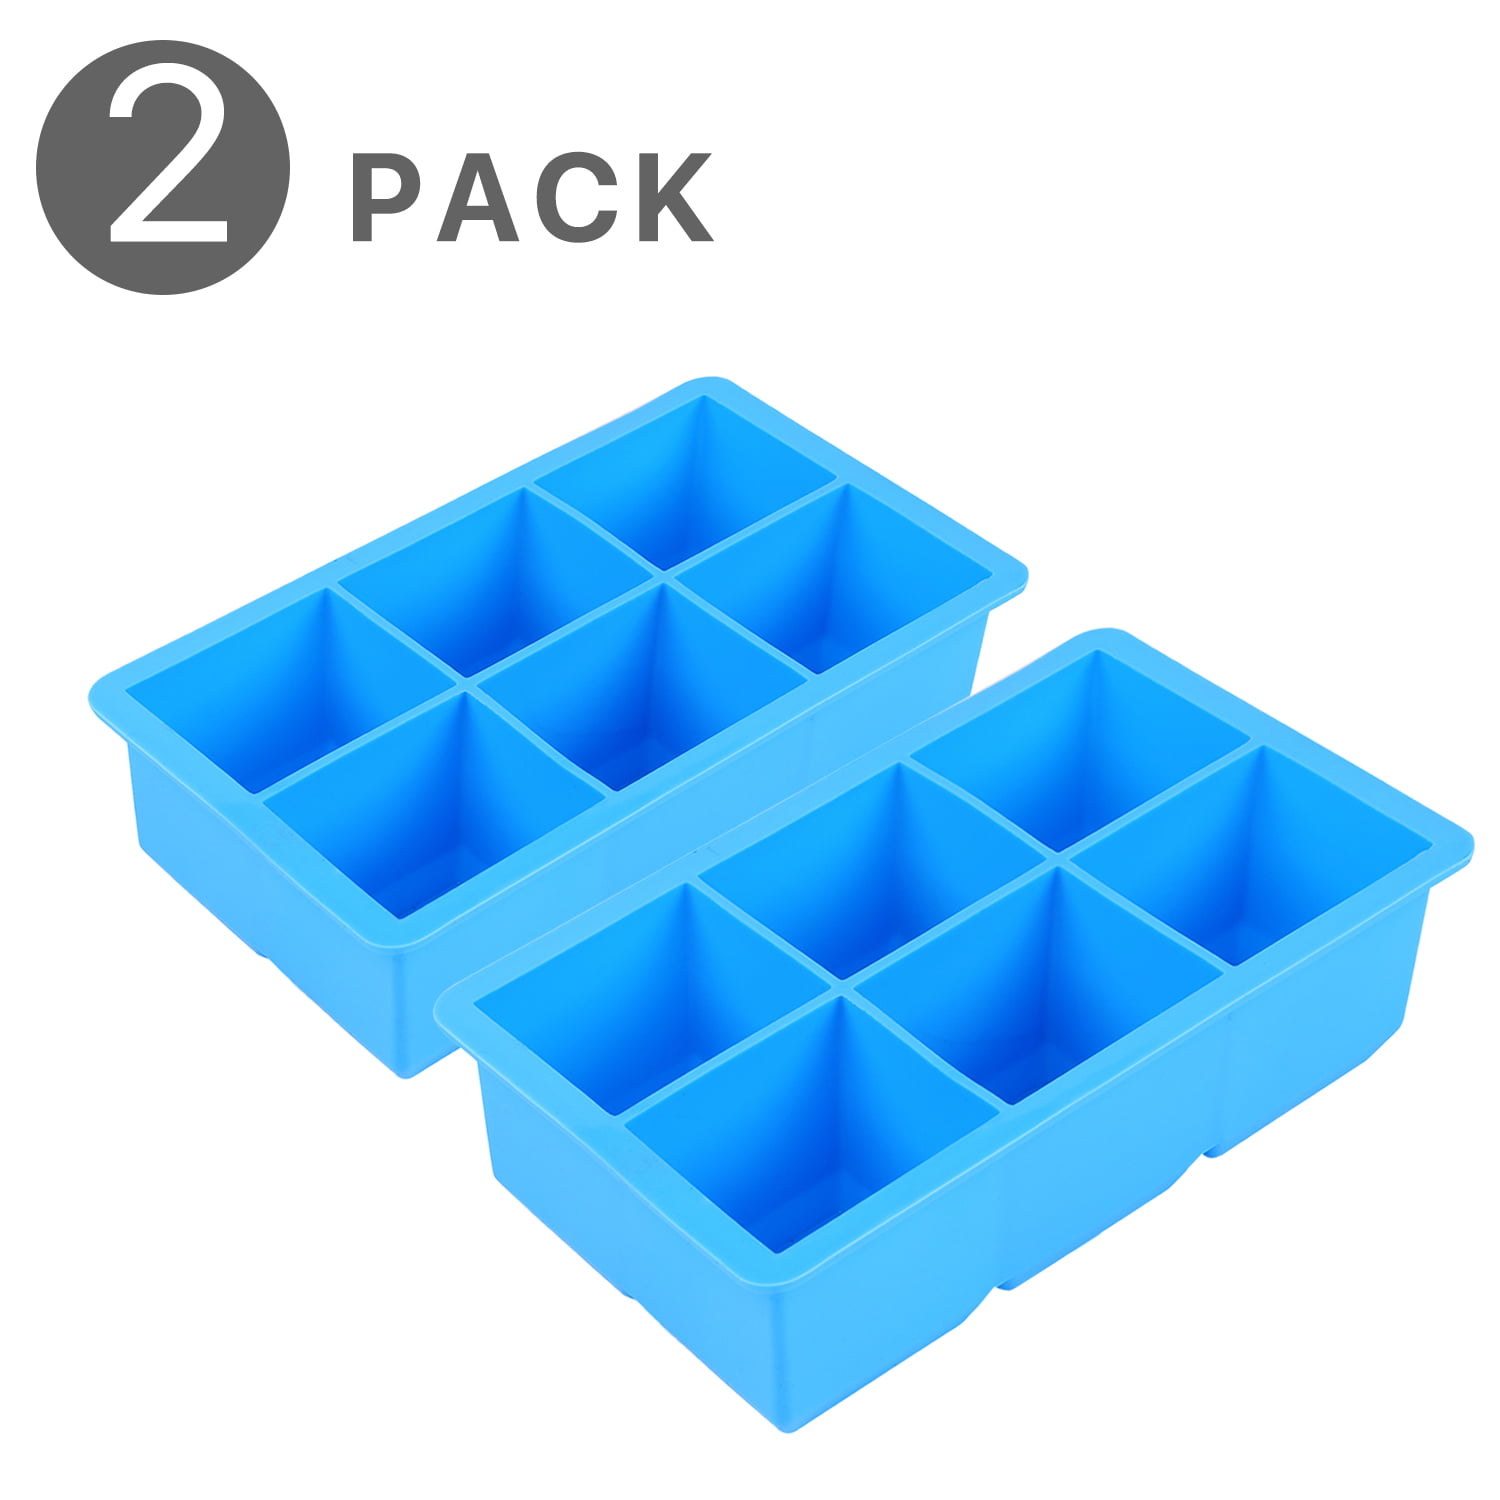 2 Pack Silicone Ice Cube Tray Molds ~Big 8 X 2 Inch Square  Whiskey ~BPA Free 